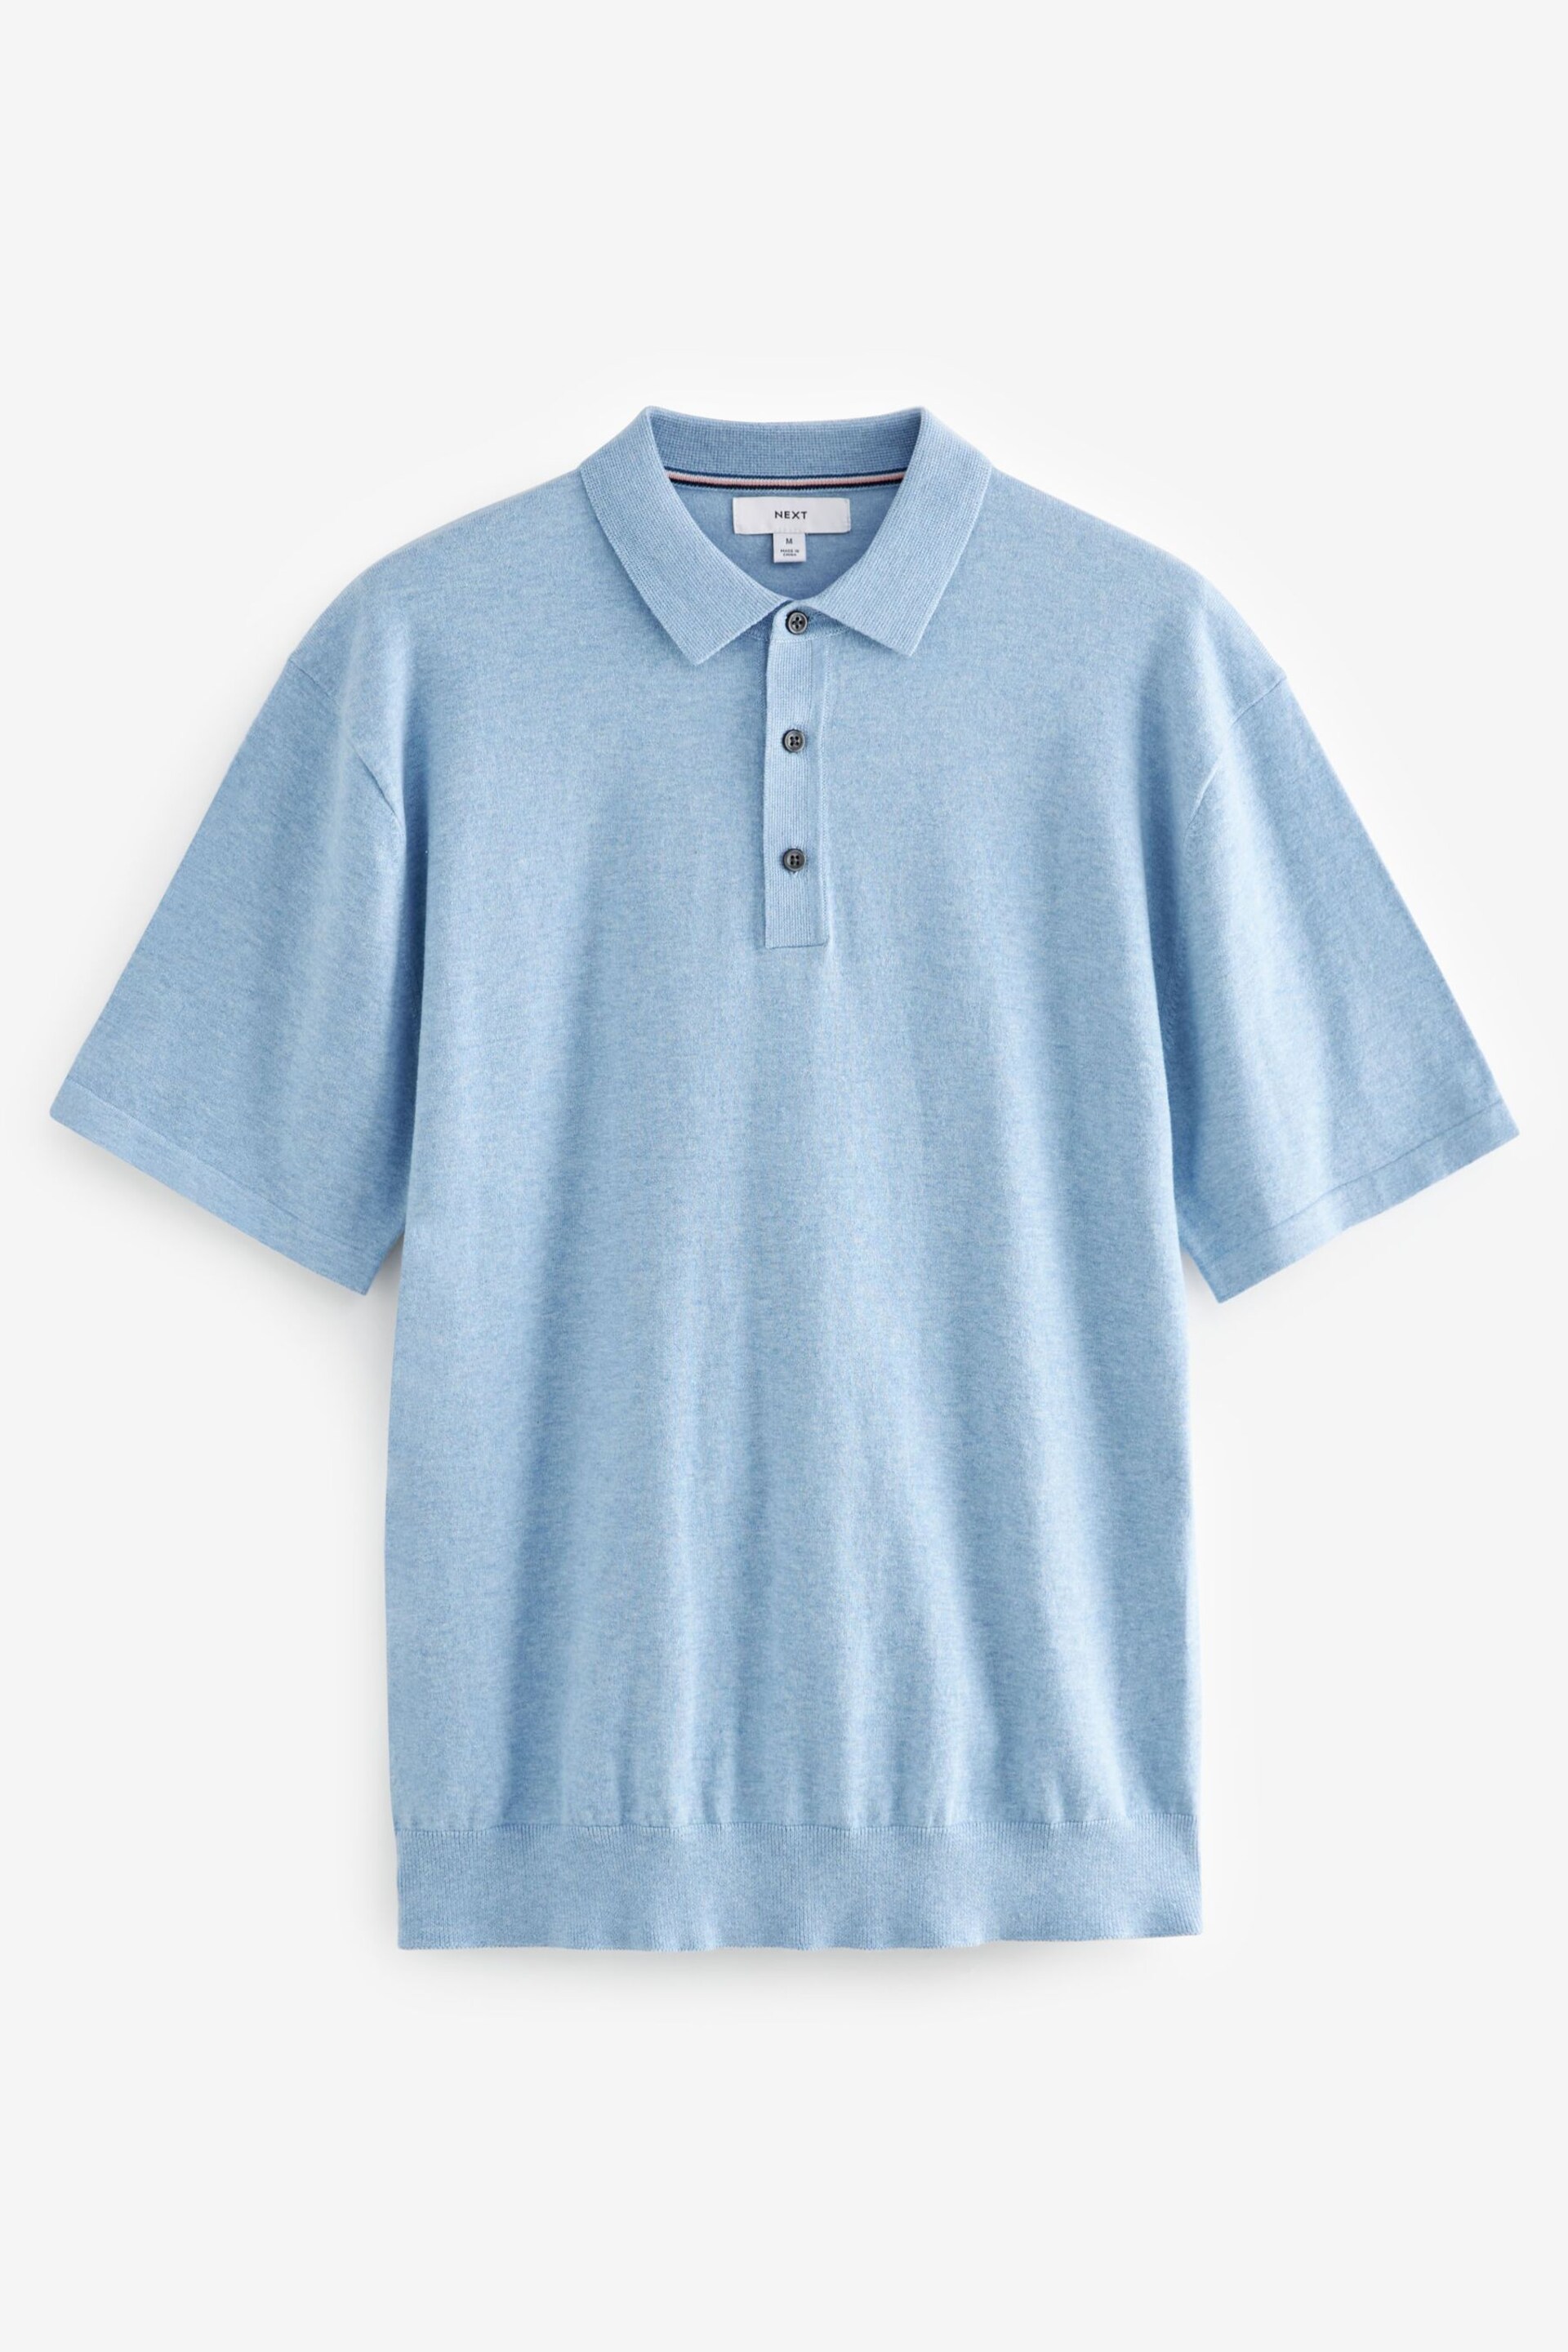 Light Blue Regular Fit Knitted Polo Shirt - Image 6 of 8